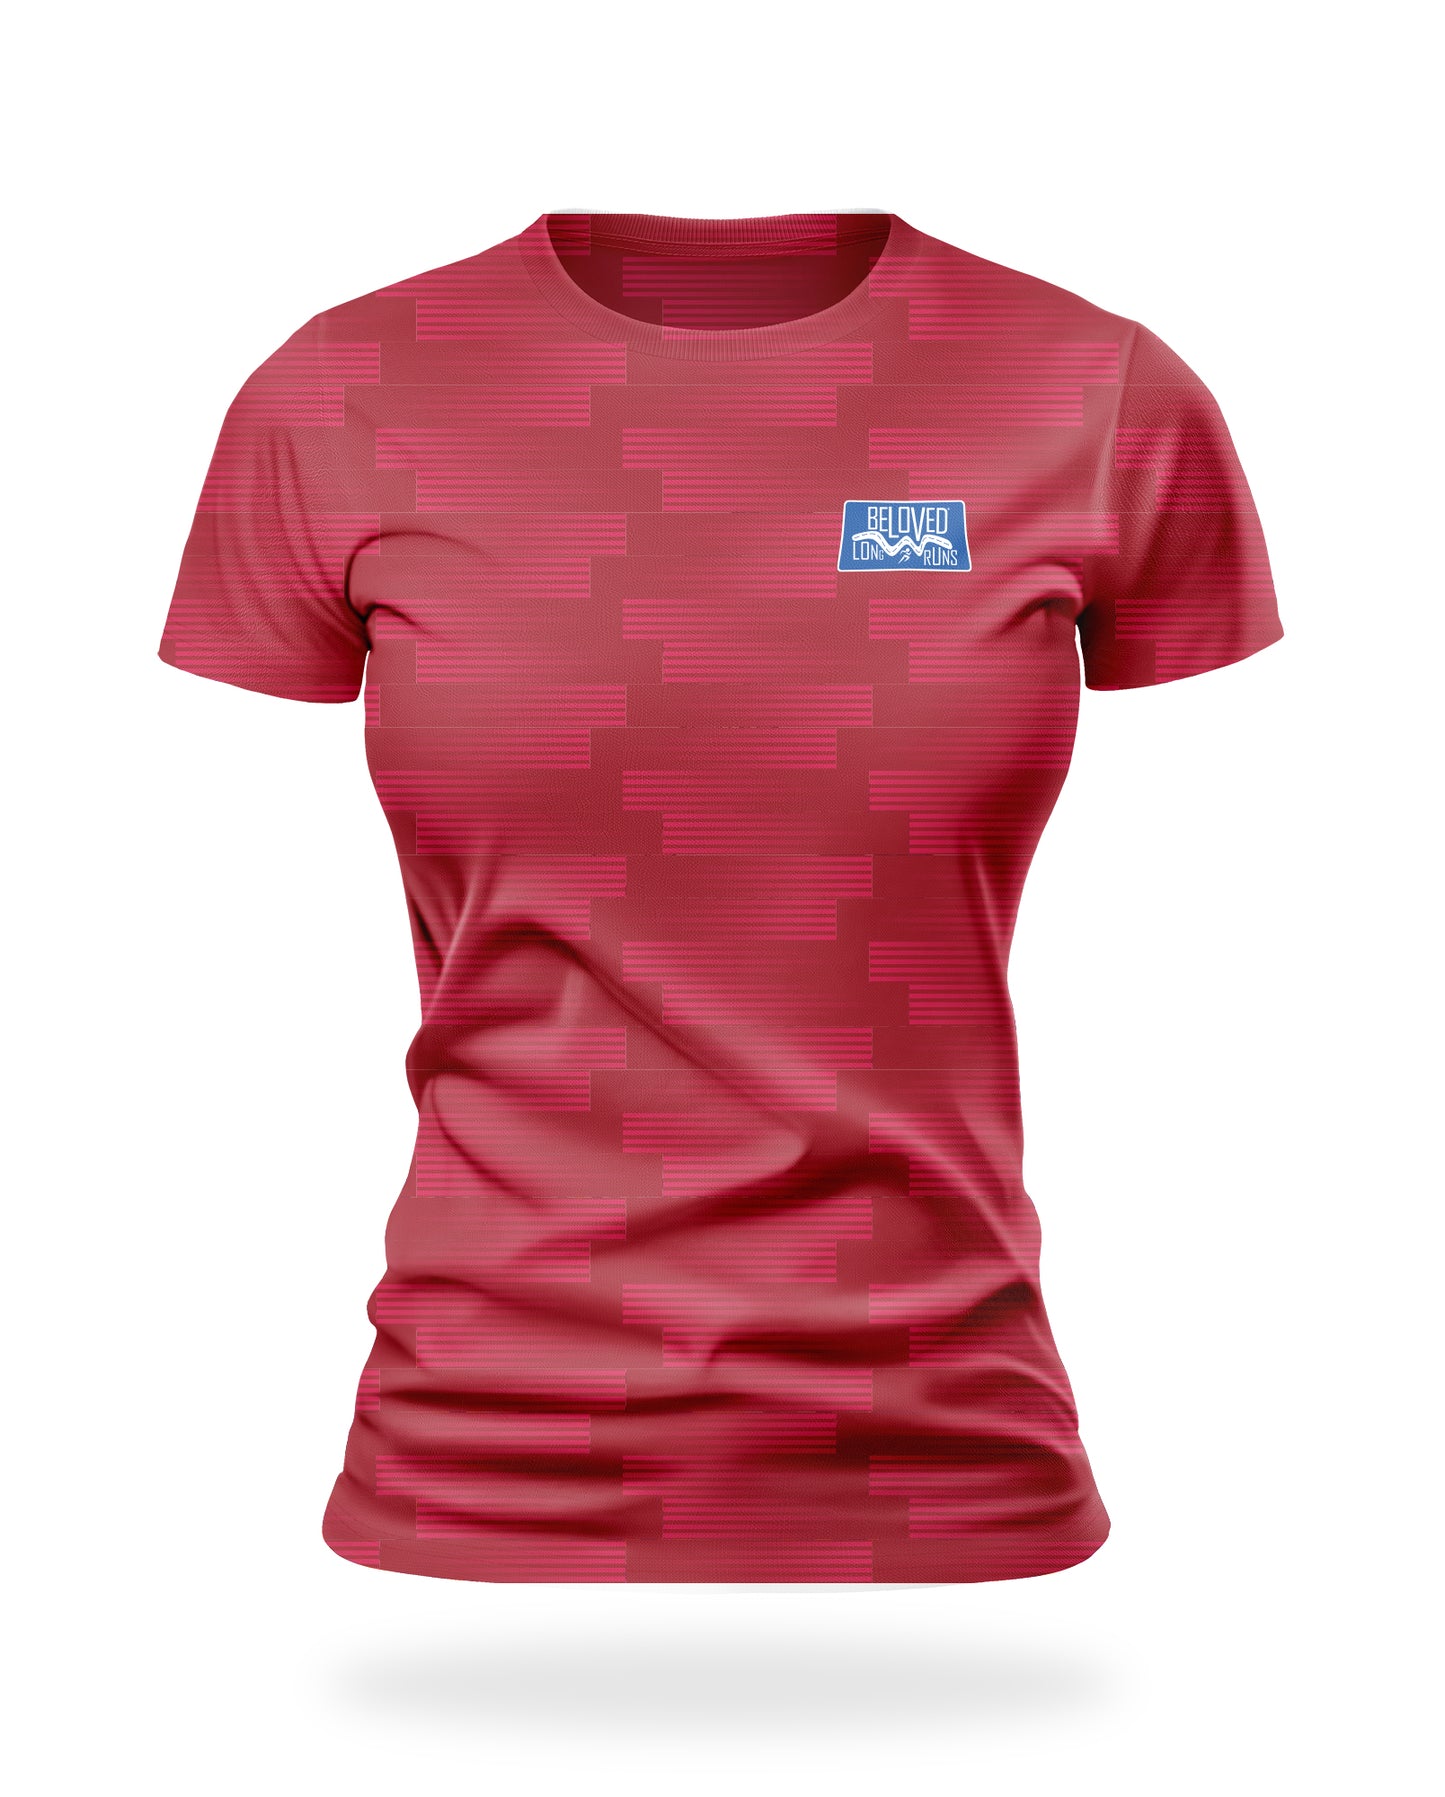 Women's BLR Two Oceans SS Tee -ARRIVING IN TIME FOR TWO OCEANS - PRE ORDER NOW